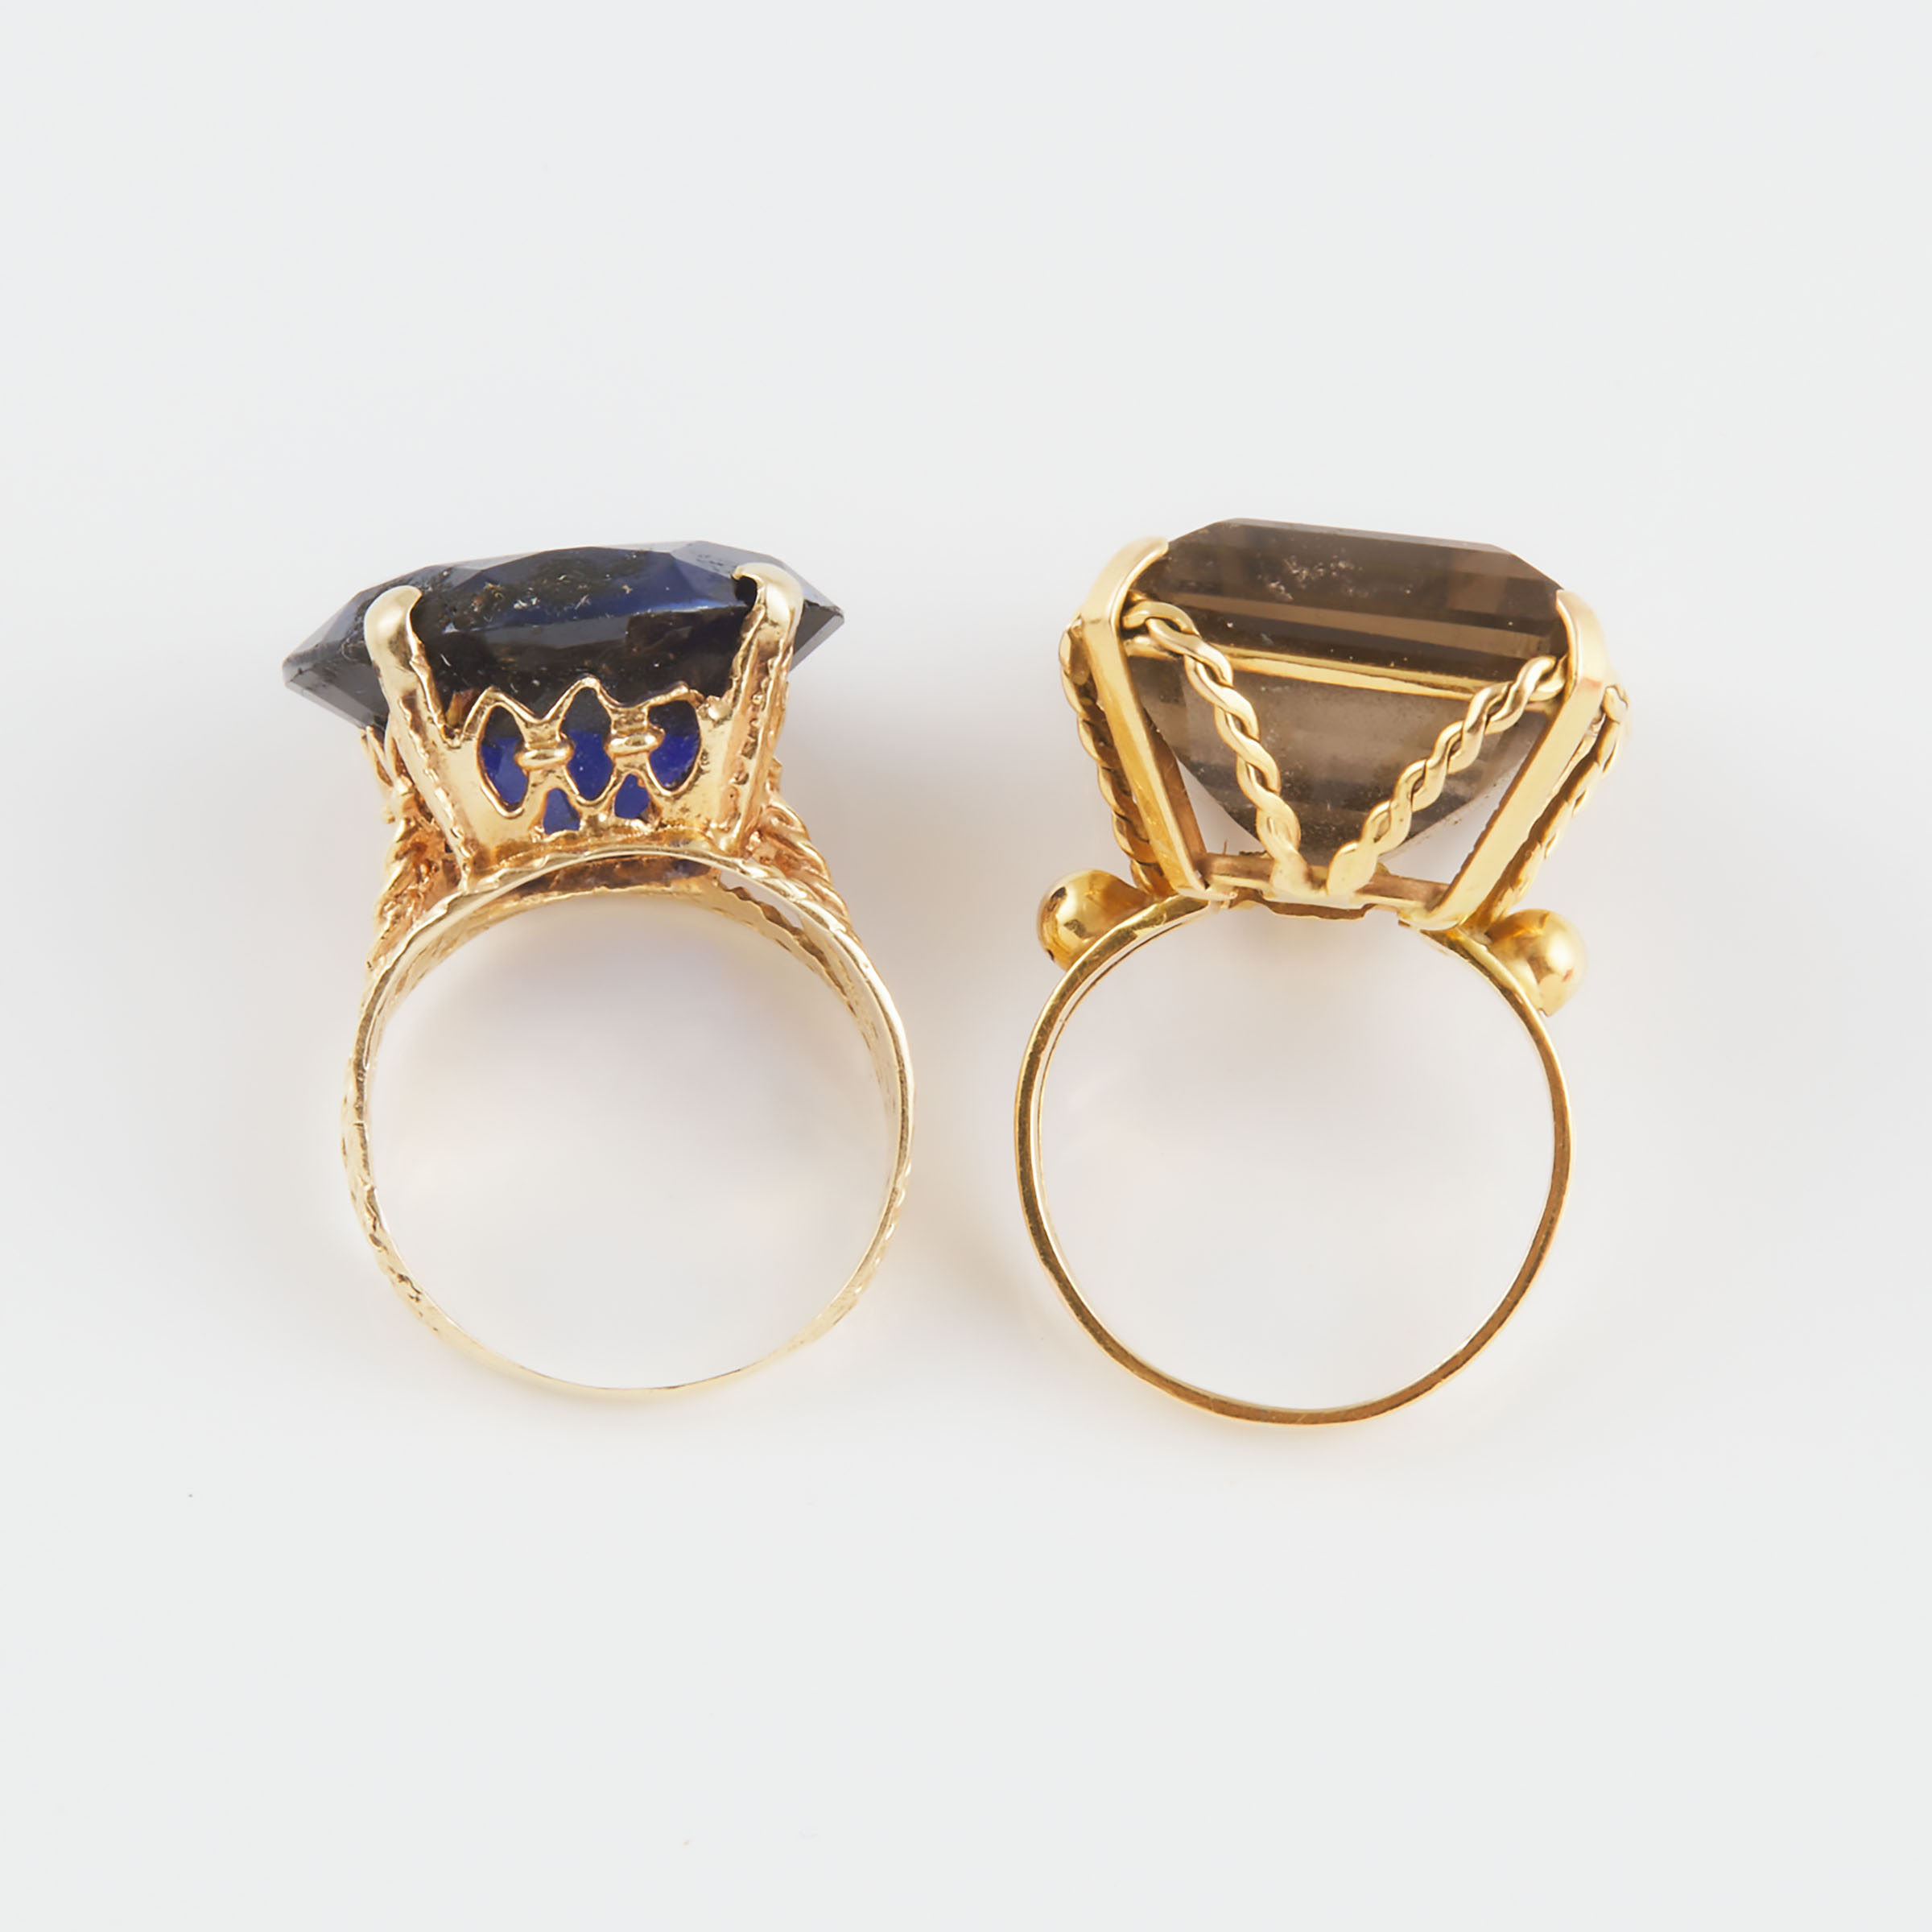 2 Yellow Gold Cocktail Rings